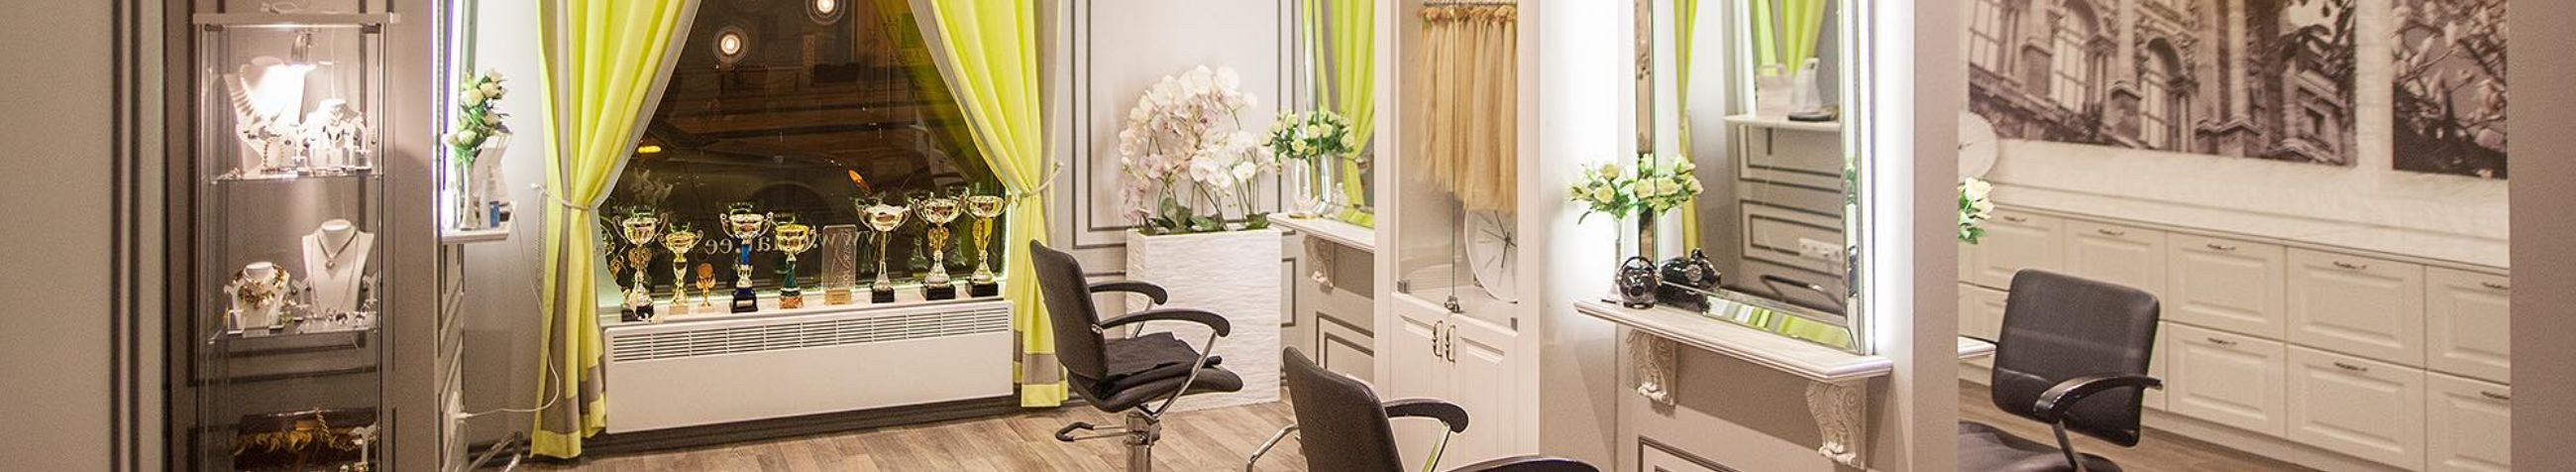 beauty salon, hair extensions, hair surgery, hair dyeing, Training, hairstyle and finishing, care and treatment, women's haircuts, beauty salon services, hair extensions salon